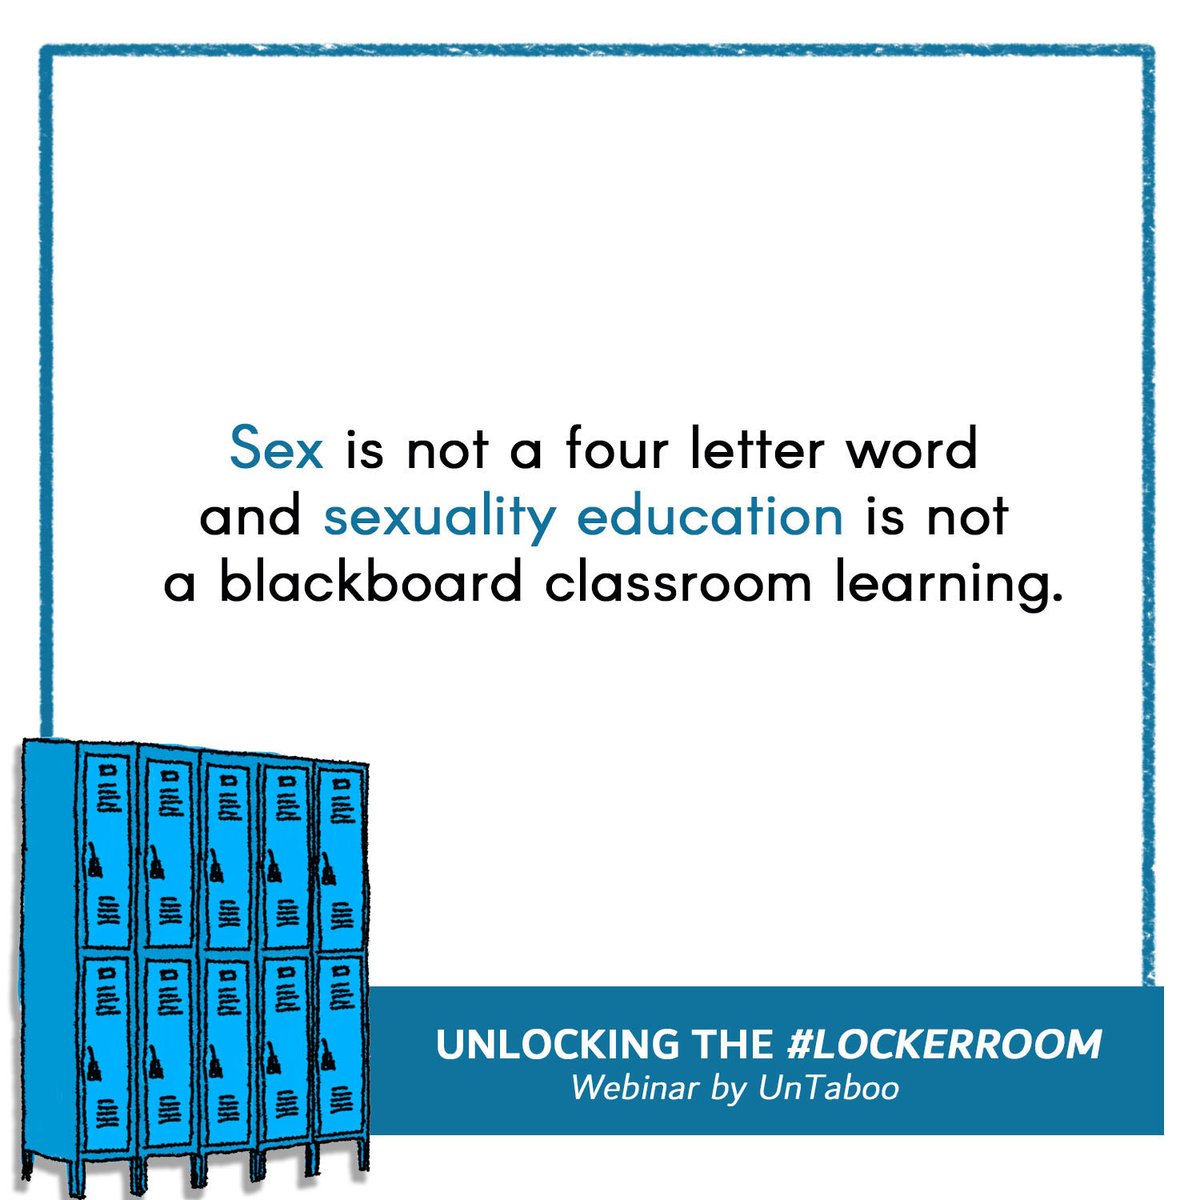 The  #BoisLockerRoom incident sparked conversations around consent & sex education. We attended a webinar by  @ScooNews,  @untabooers & APER — where we had solution-based conversations around sex education, destigmatising these issues, & the role of parents+schools. (1/5)